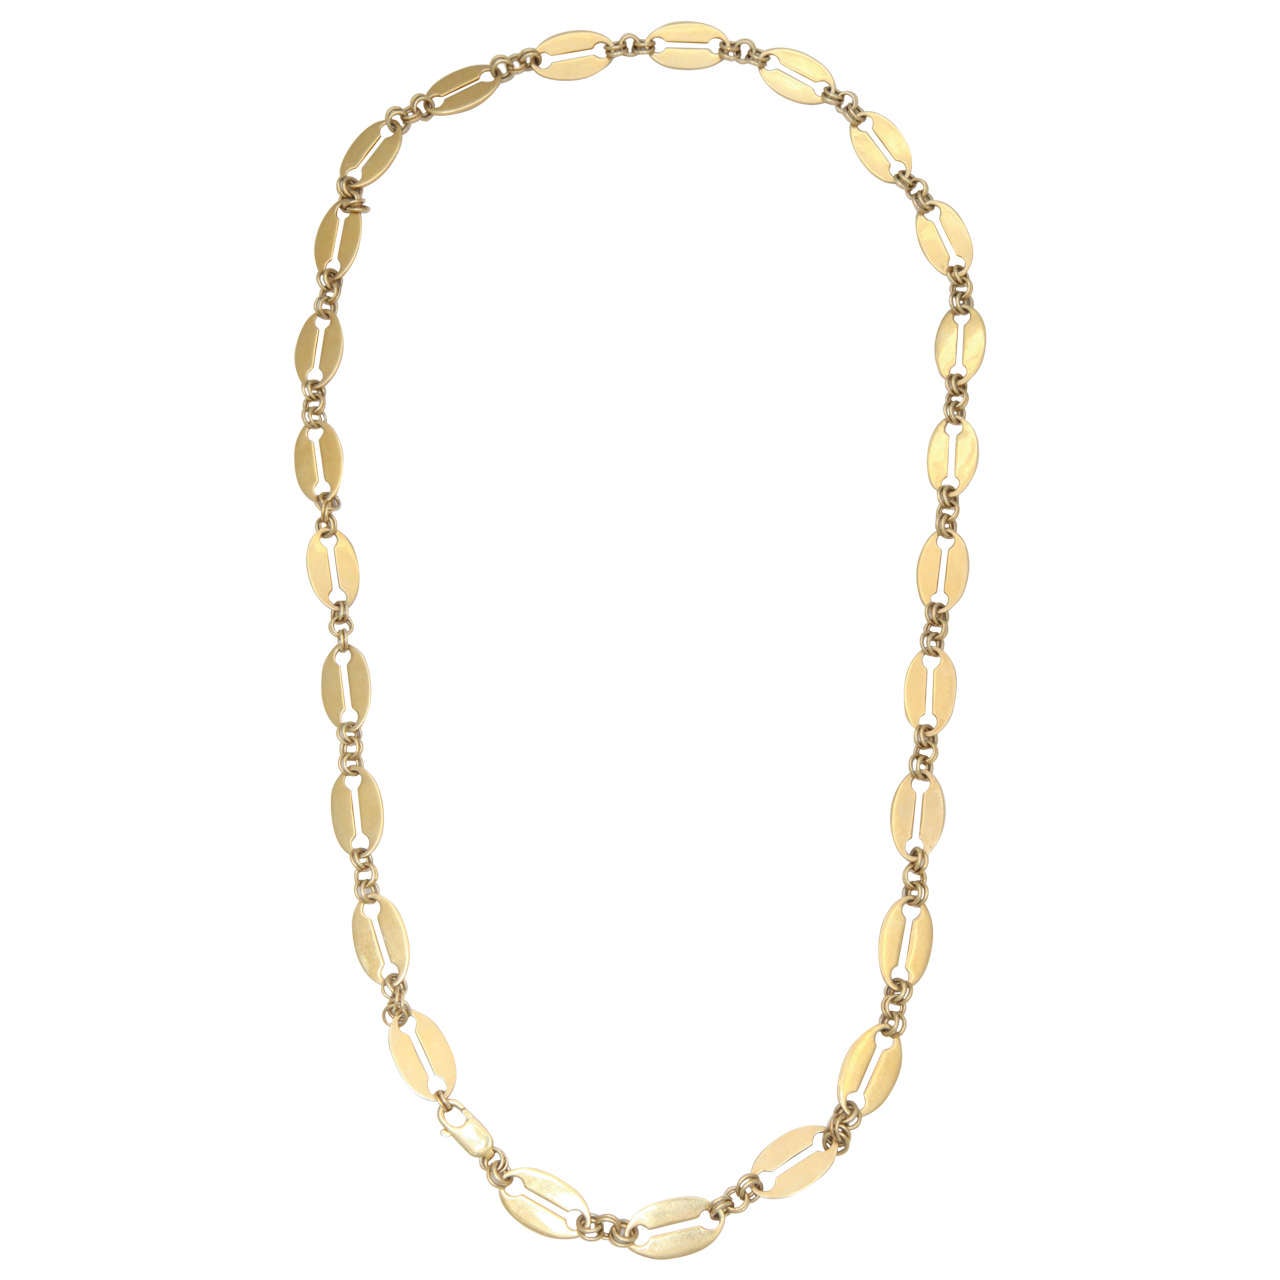 Inspired by Russian Orthodox chains of ancient Muscovy, this hand-finished chain comprises a line of twenty-five flat oval links of gilded silver, each with central horizontal opening and rounded ends, joined by double silver-gilded loops. Fitted